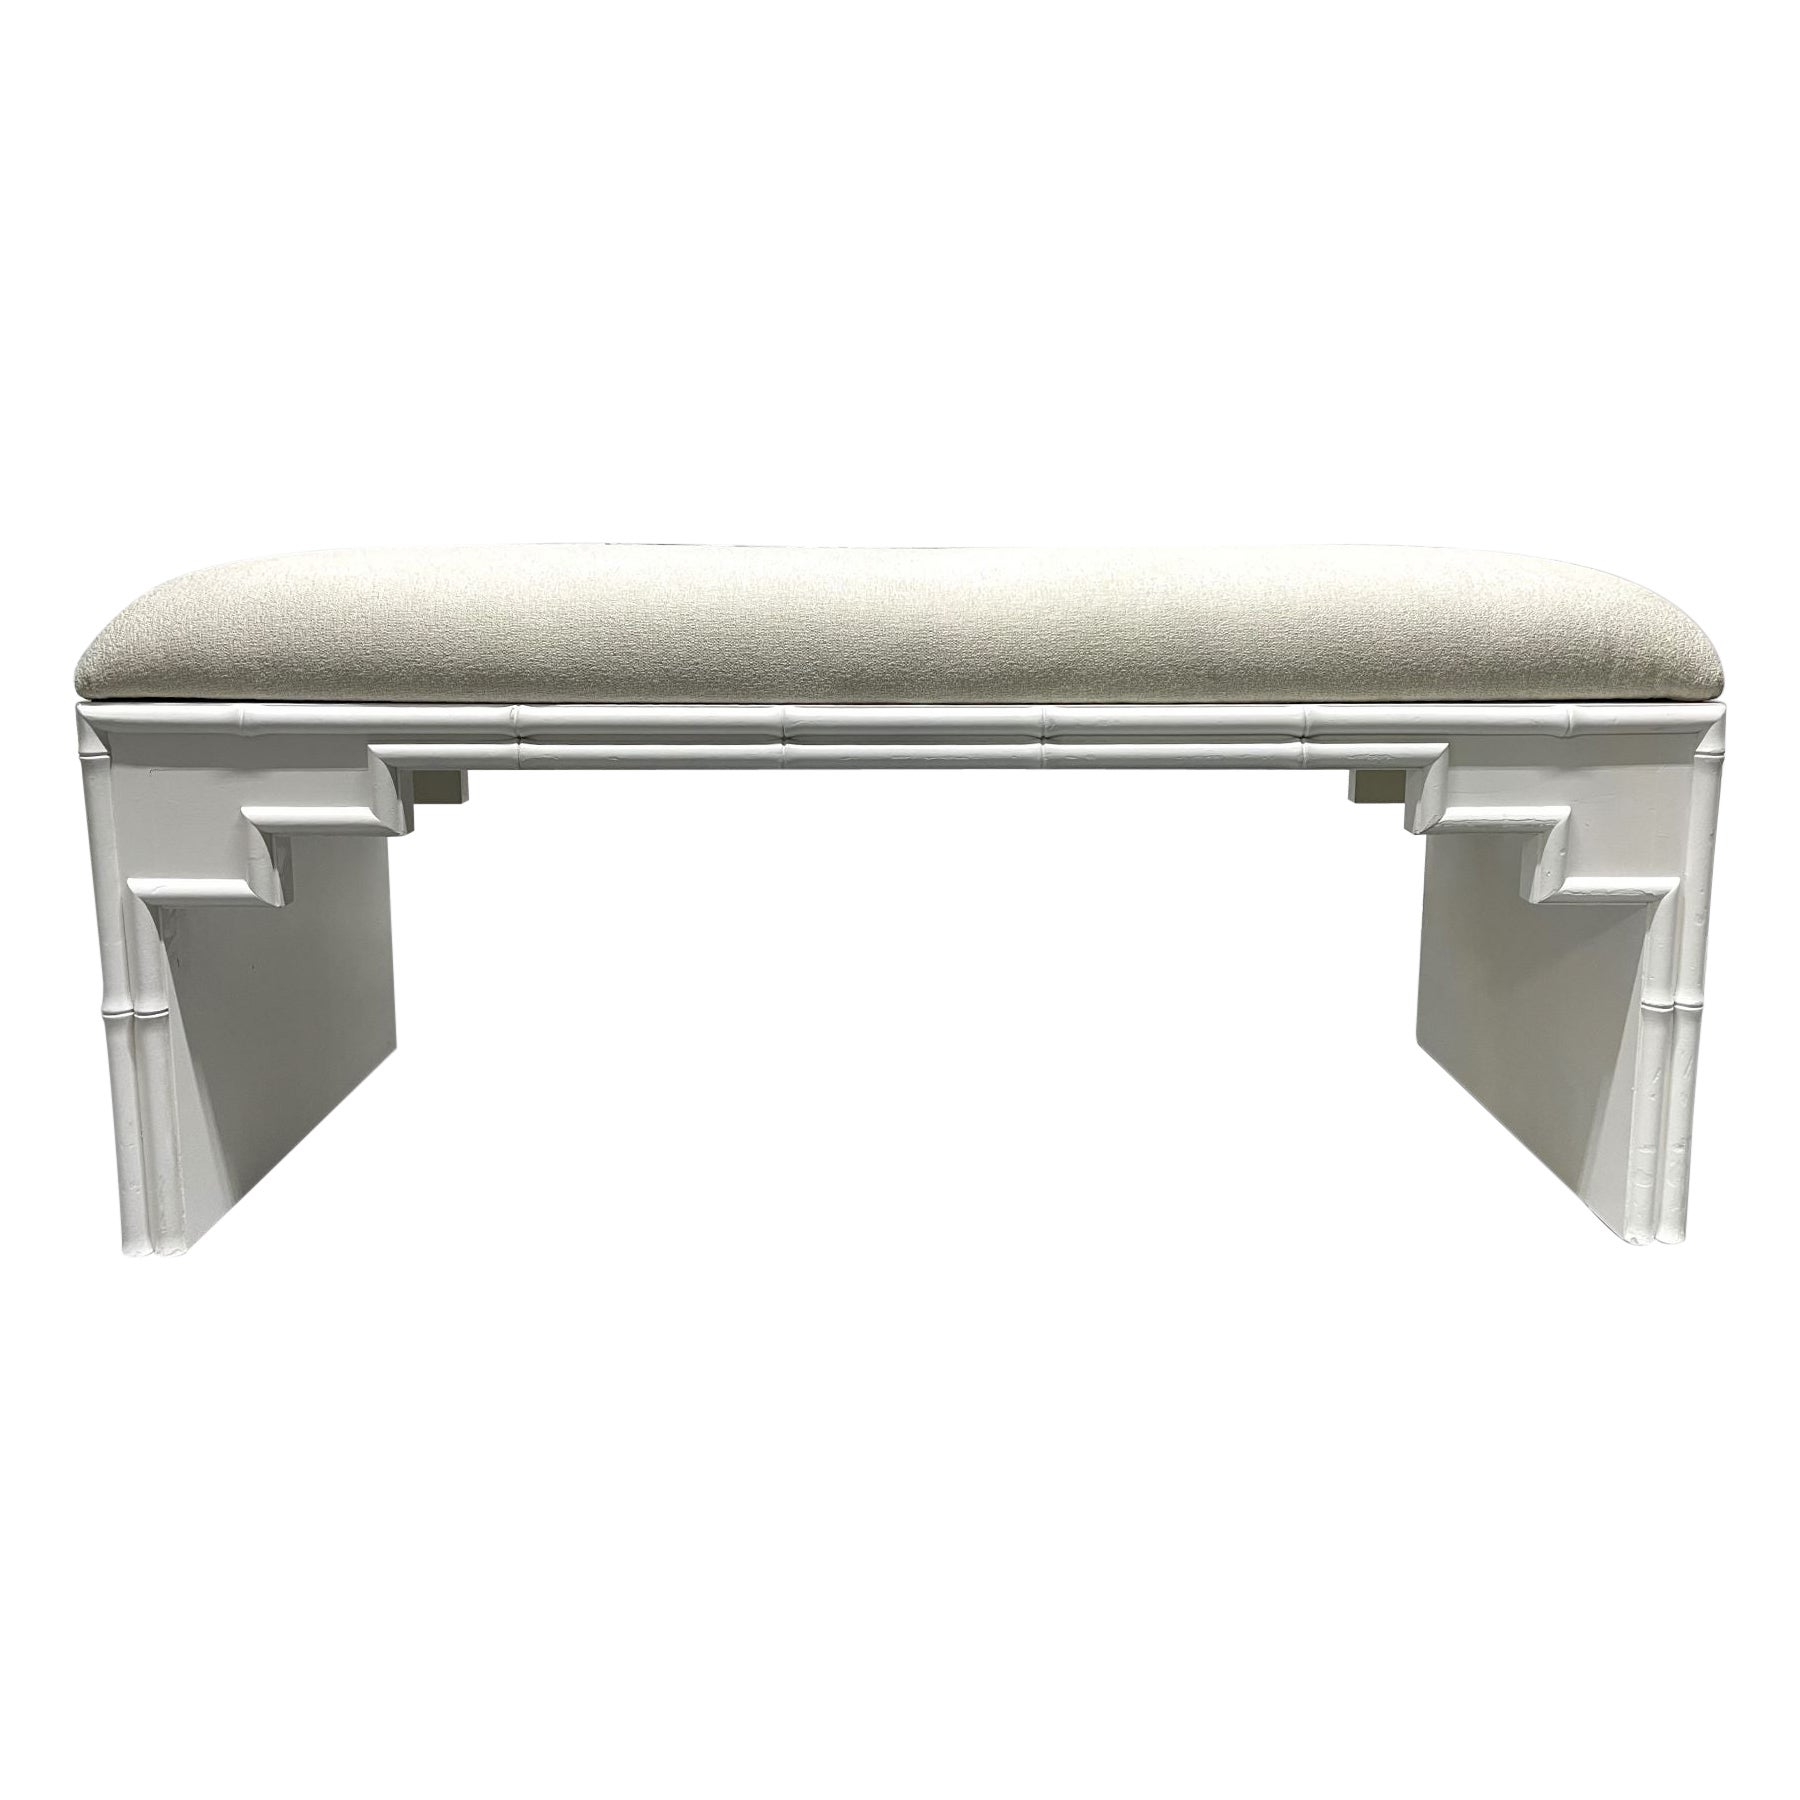 Hollywood Regency Faux Bamboo Upholstered Bench